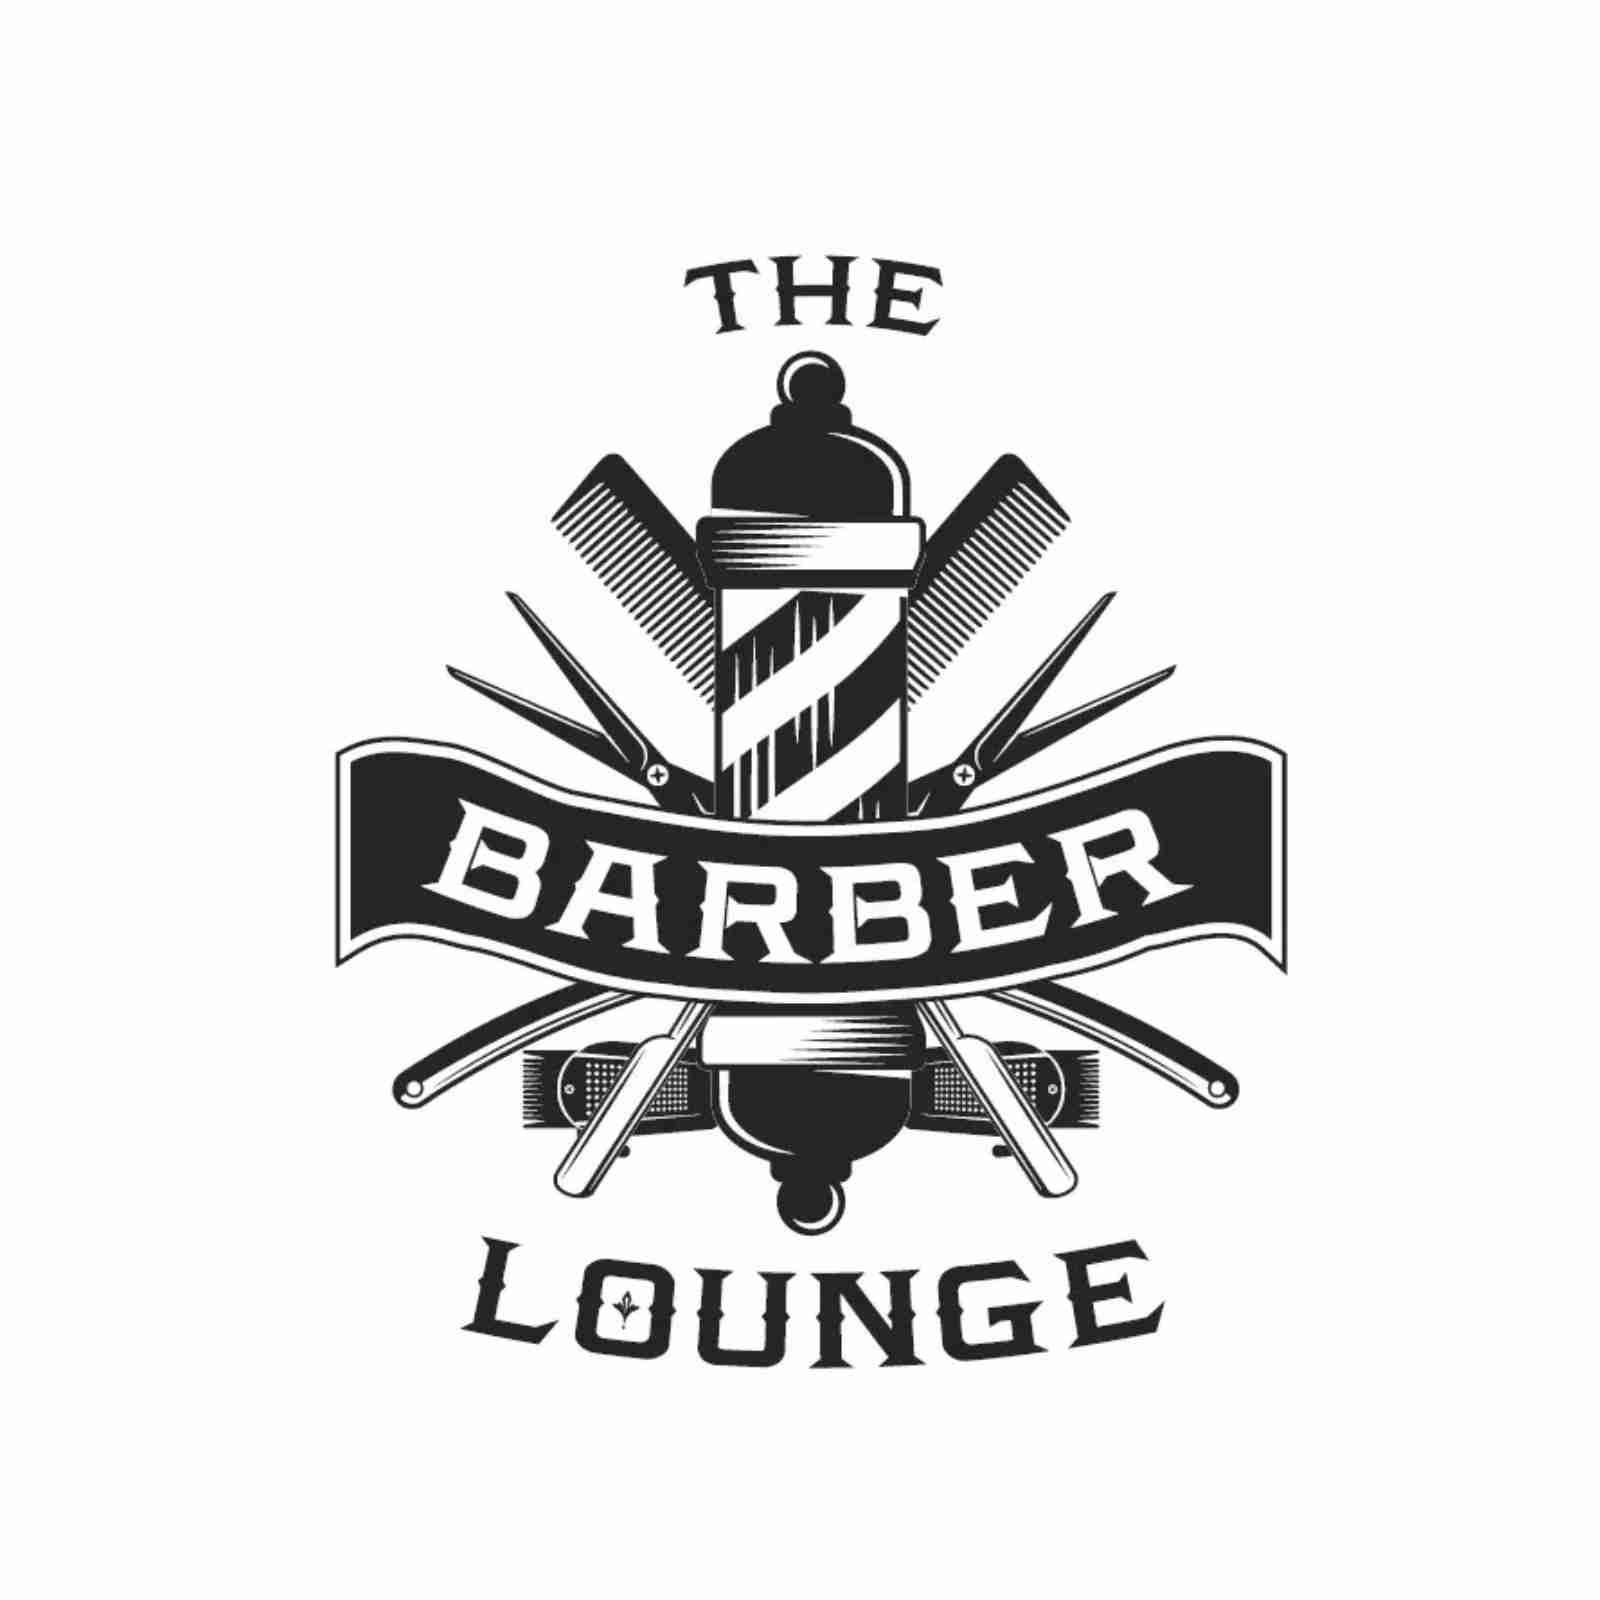 Owen Timmins - The Barber Lounge